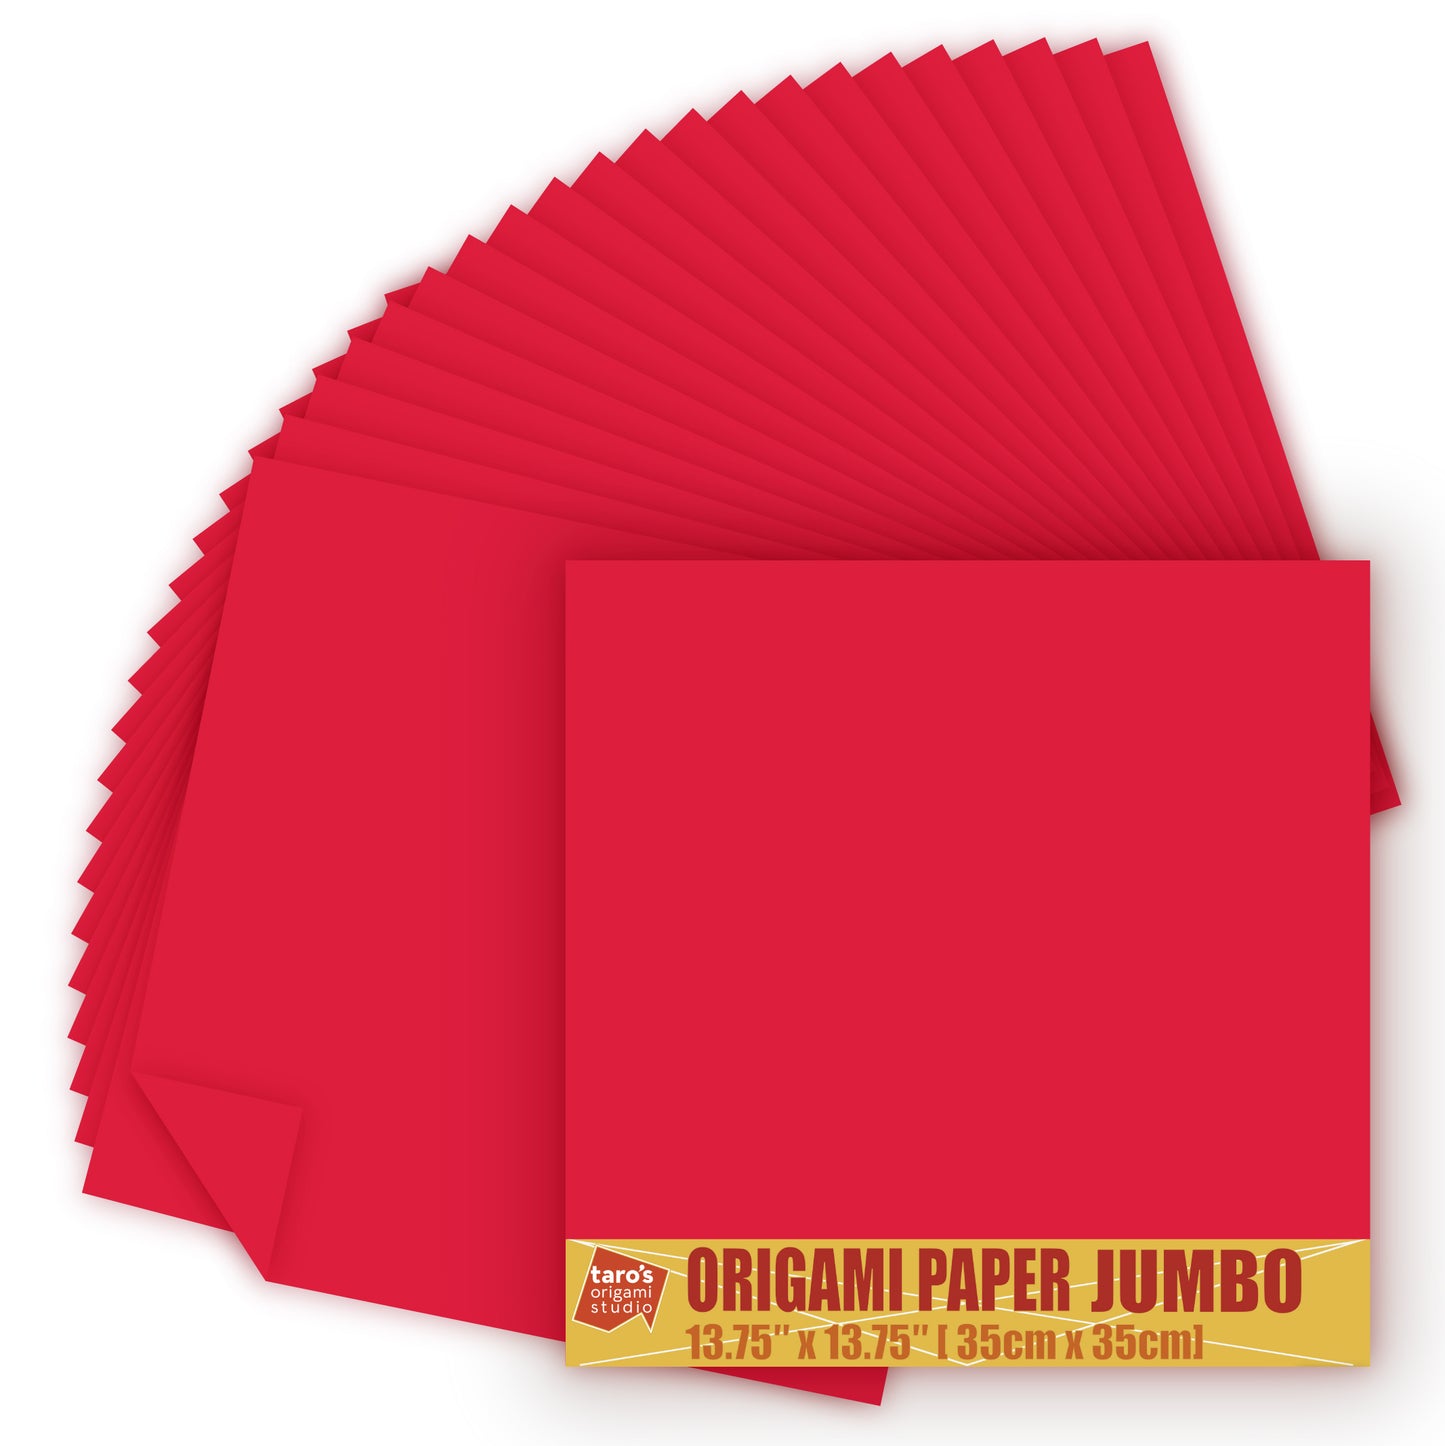 [Taro's Origami Studio] TANT Jumbo 13.75 Inch (35 cm) Double Sided Single Color (Crimson Red) 20 Sheets (All Same Color) for Beginner to Expert (Made in Japan)